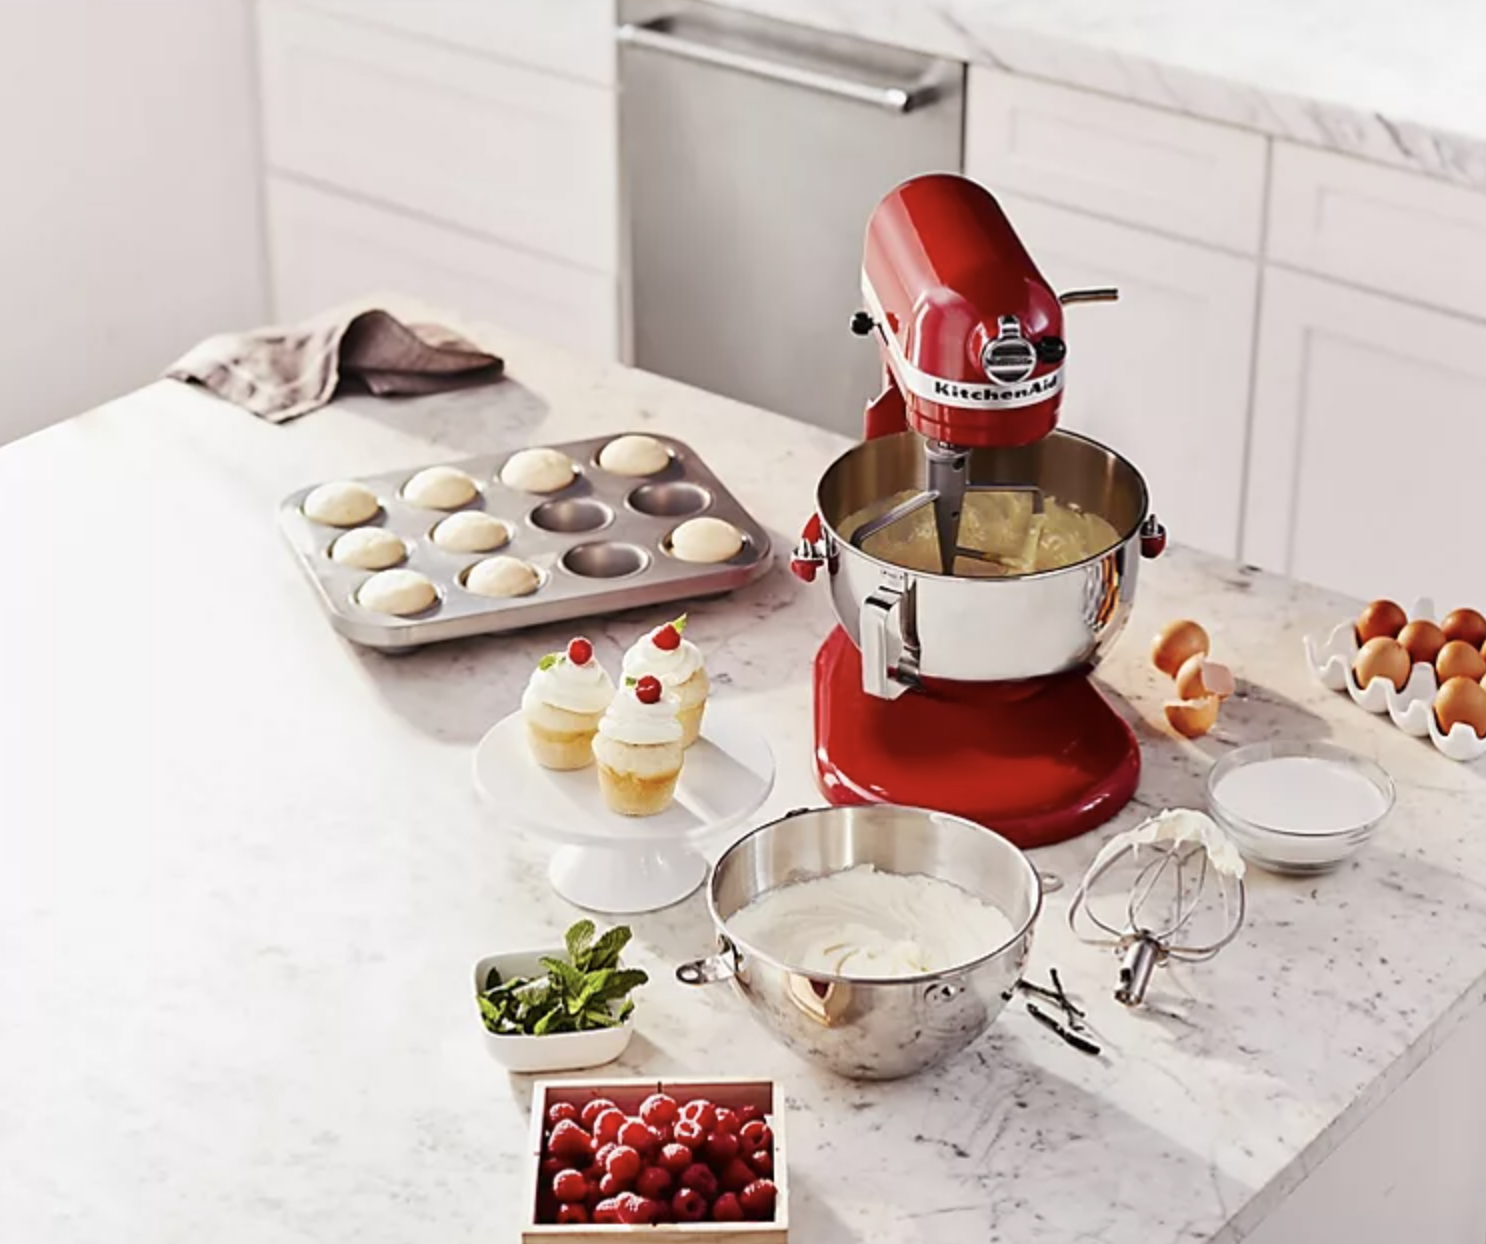 the red mixer on a counter with cupcake ingredients next to it